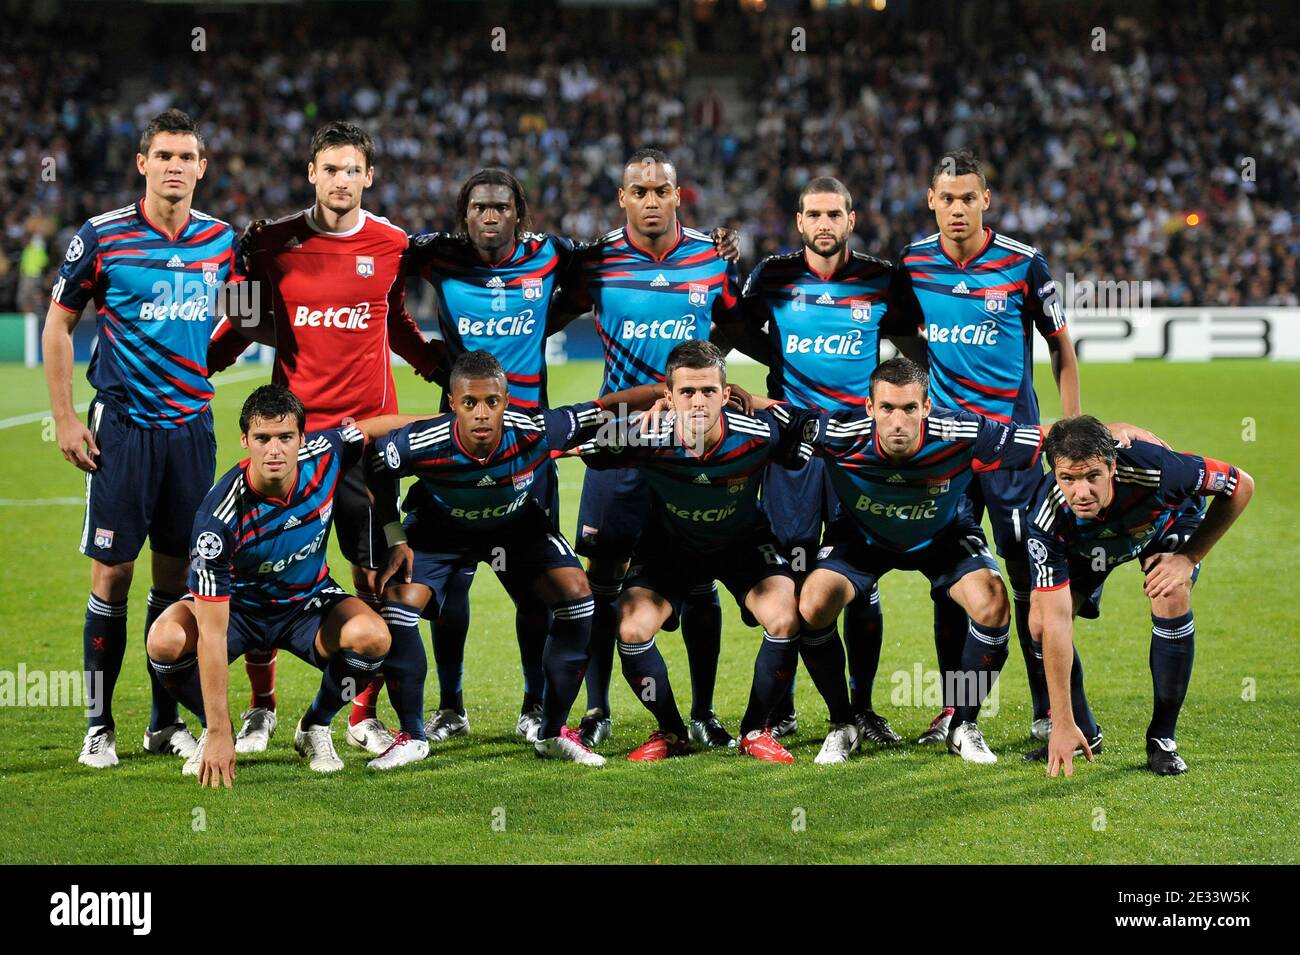 Lyon's team during the UEFA Champions League Soccer match, Group B, Olympique  Lyonnais and FC Schalke 04 at Gerland stafdium in Lyon, France on September  14, 2010. Lyon won 1-0. Photo by